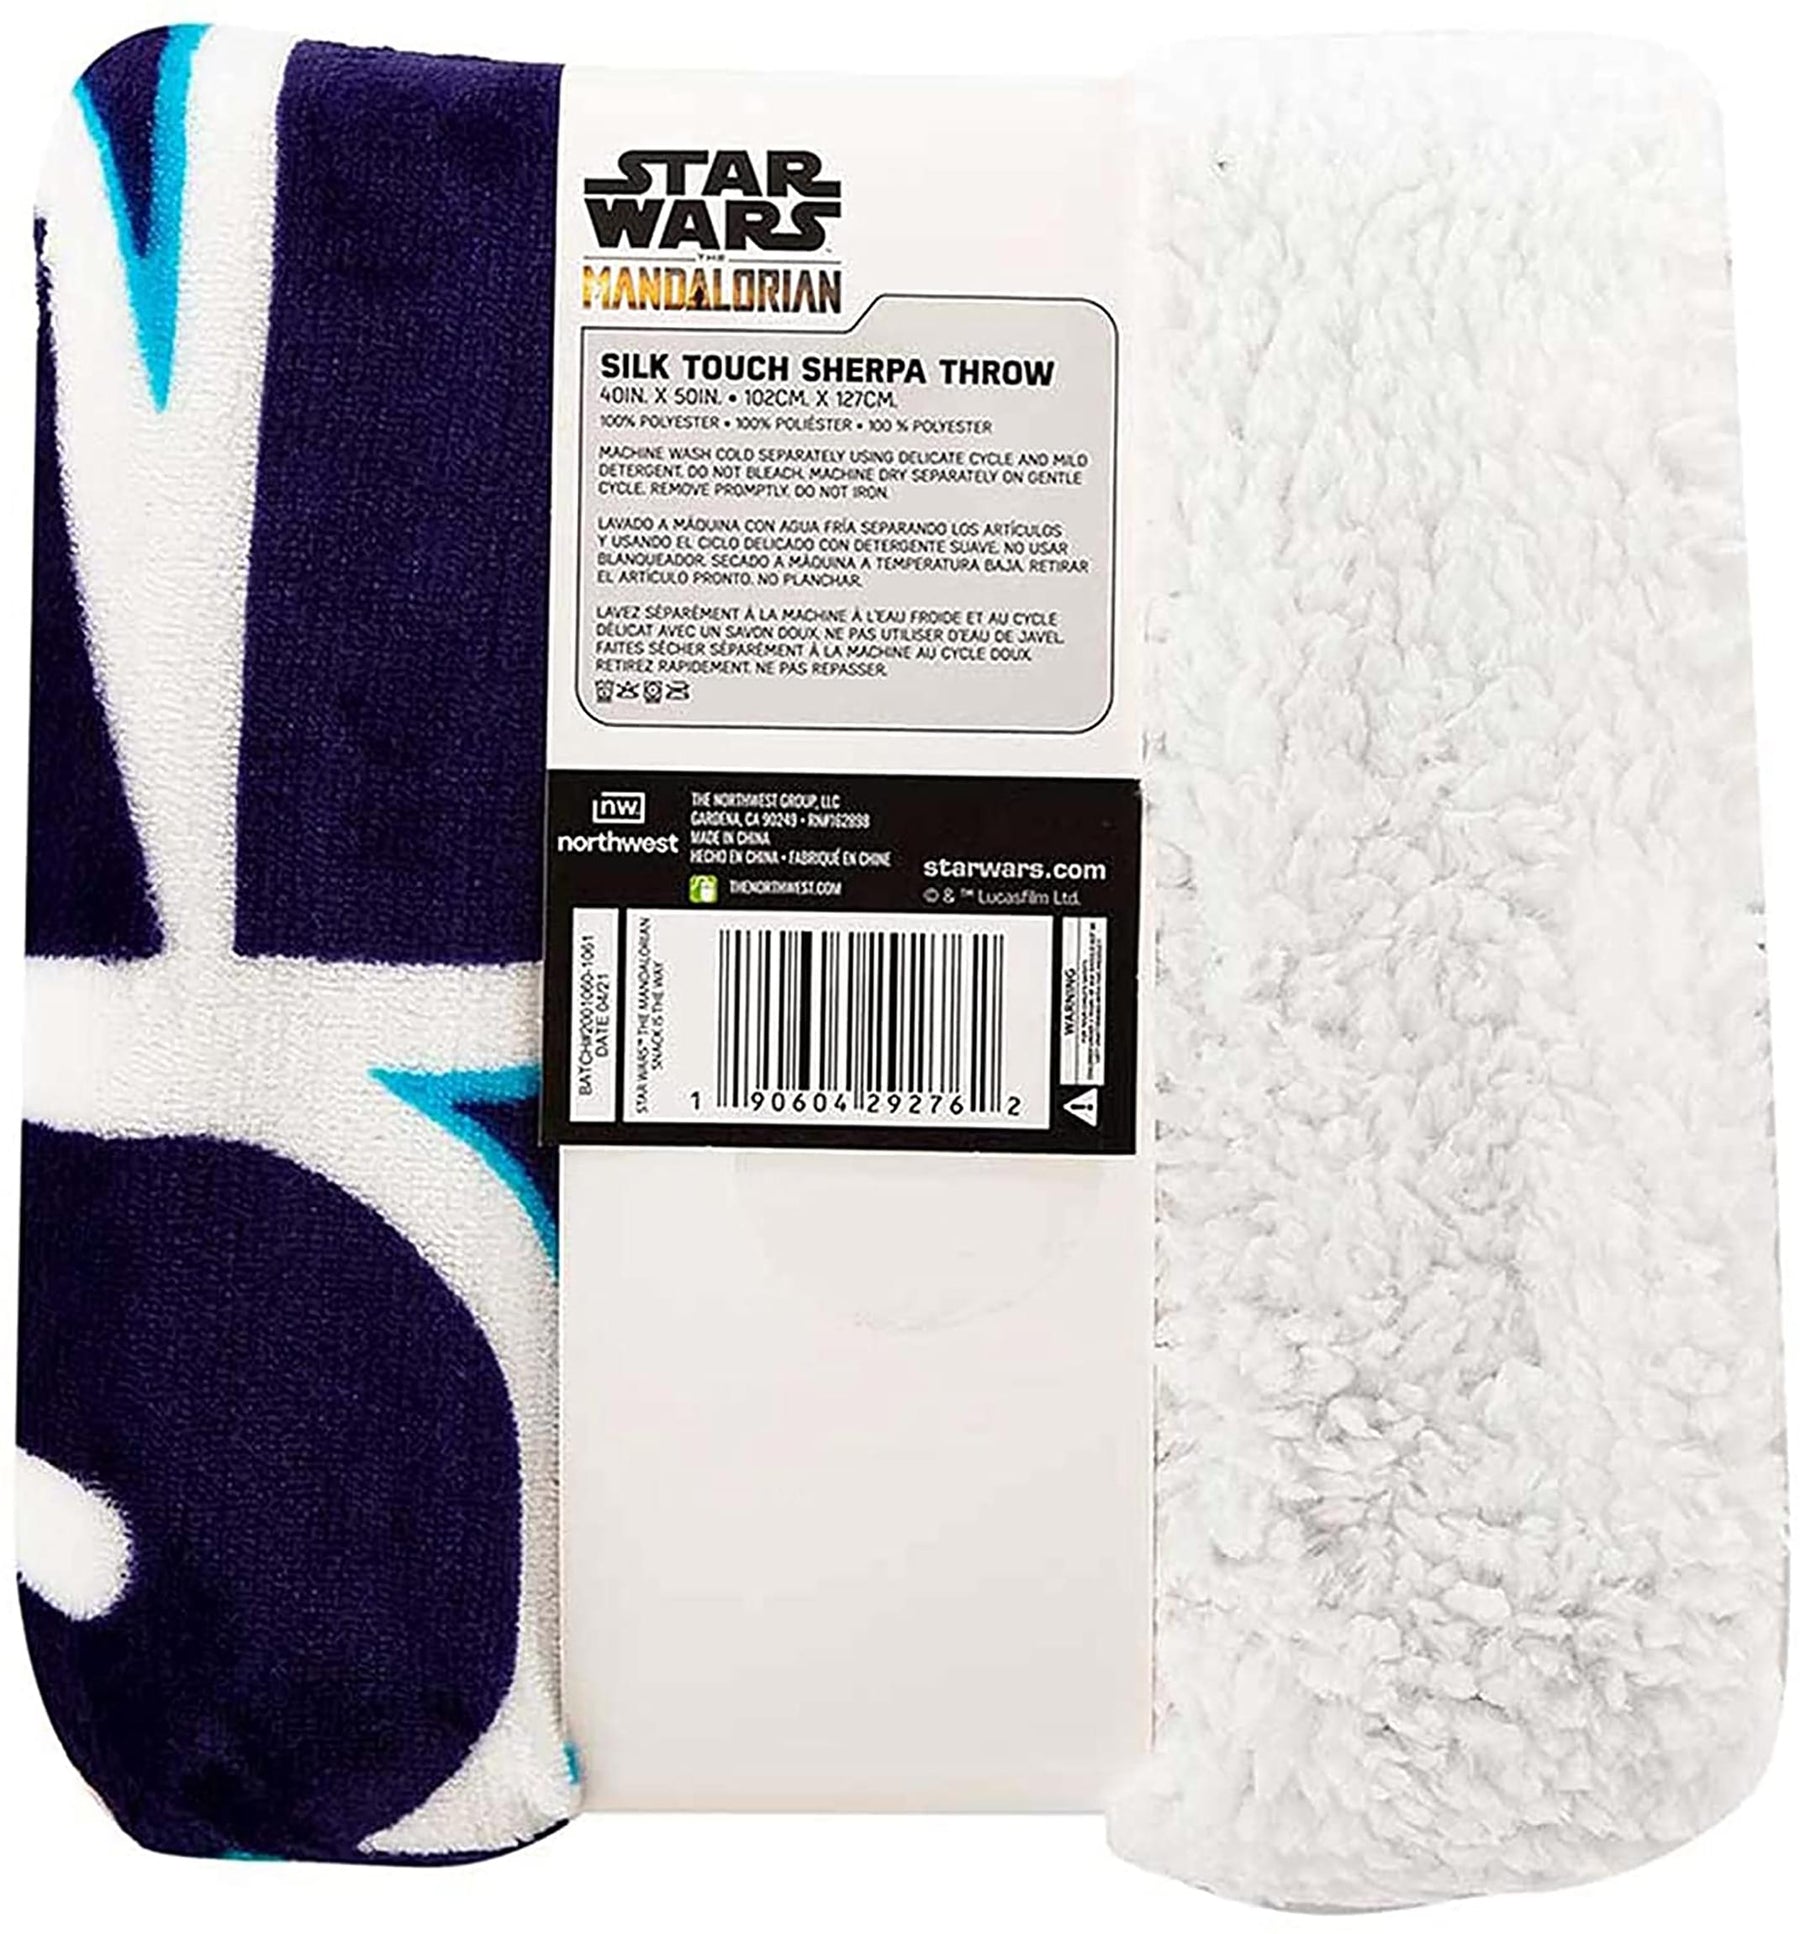 Star Wars The Child Snack Is Way 40 x 50 Inch Silk Touch Sherpa Throw Blanket